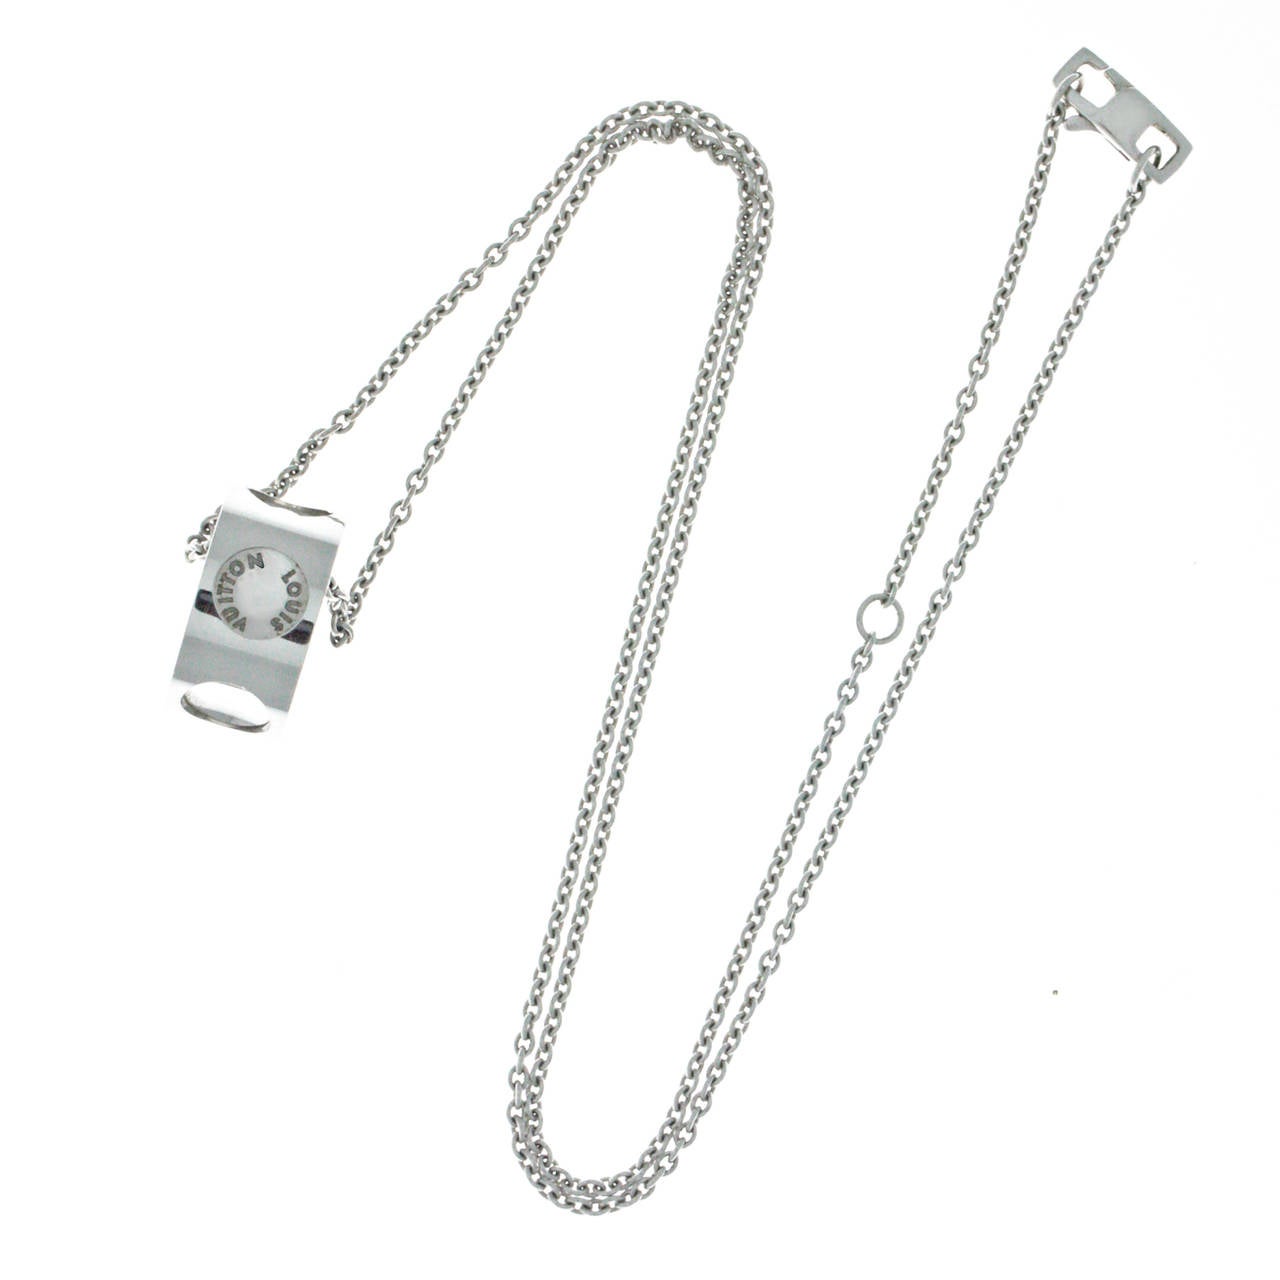 Timeless style meets contemporary luxury in this 18k White Gold Empreinte Necklace from Louis Vuitton. The 17″ Necklace length makes it the perfect size for a wide variety of dresses, blouses, and other fine fashion, while the unmistakable Louis